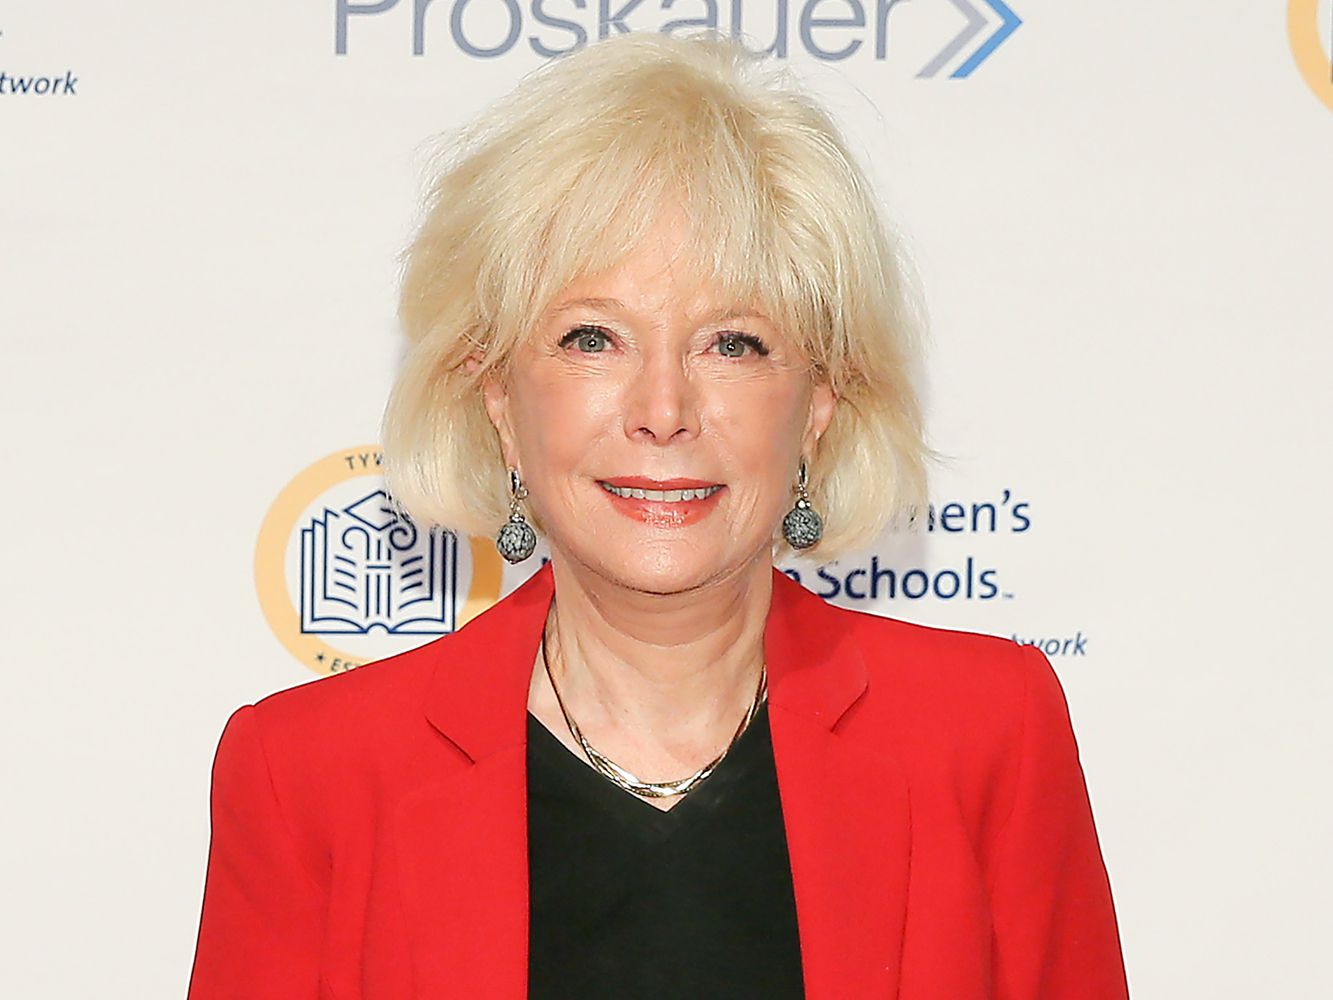 how old is lesley stahl